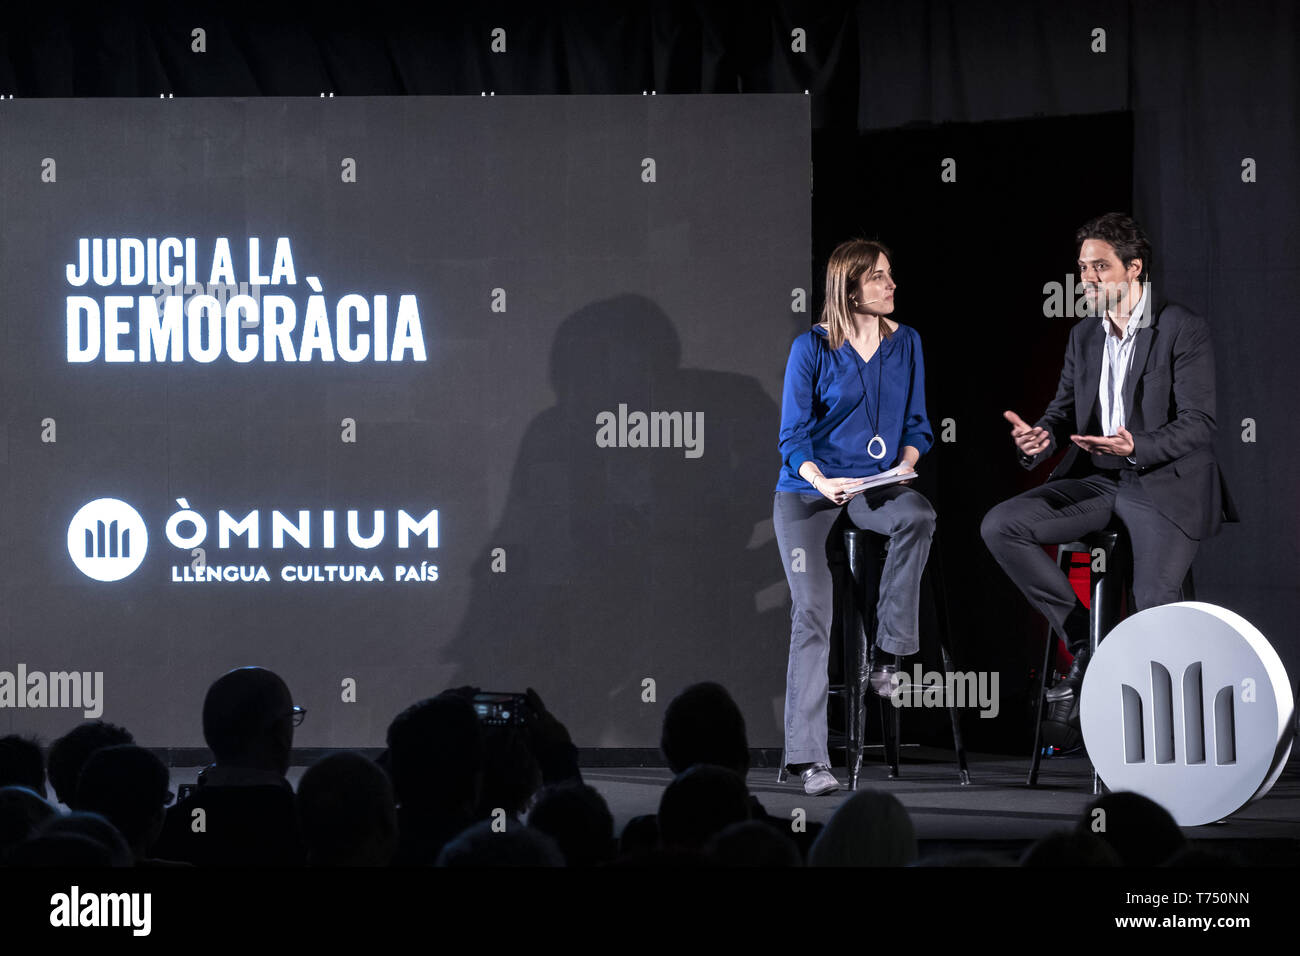 Barcelona, Catalonia, Spain. 4th May, 2019. The journalist and board member of 'mnium, Claudia Pujol seen accompanying Jordi Cuixart's defence lawyer Olivier Peter on stage during the presentation of The evidence forbidden by the Supreme Court. Credit: ZUMA Press, Inc./Alamy Live News Stock Photo